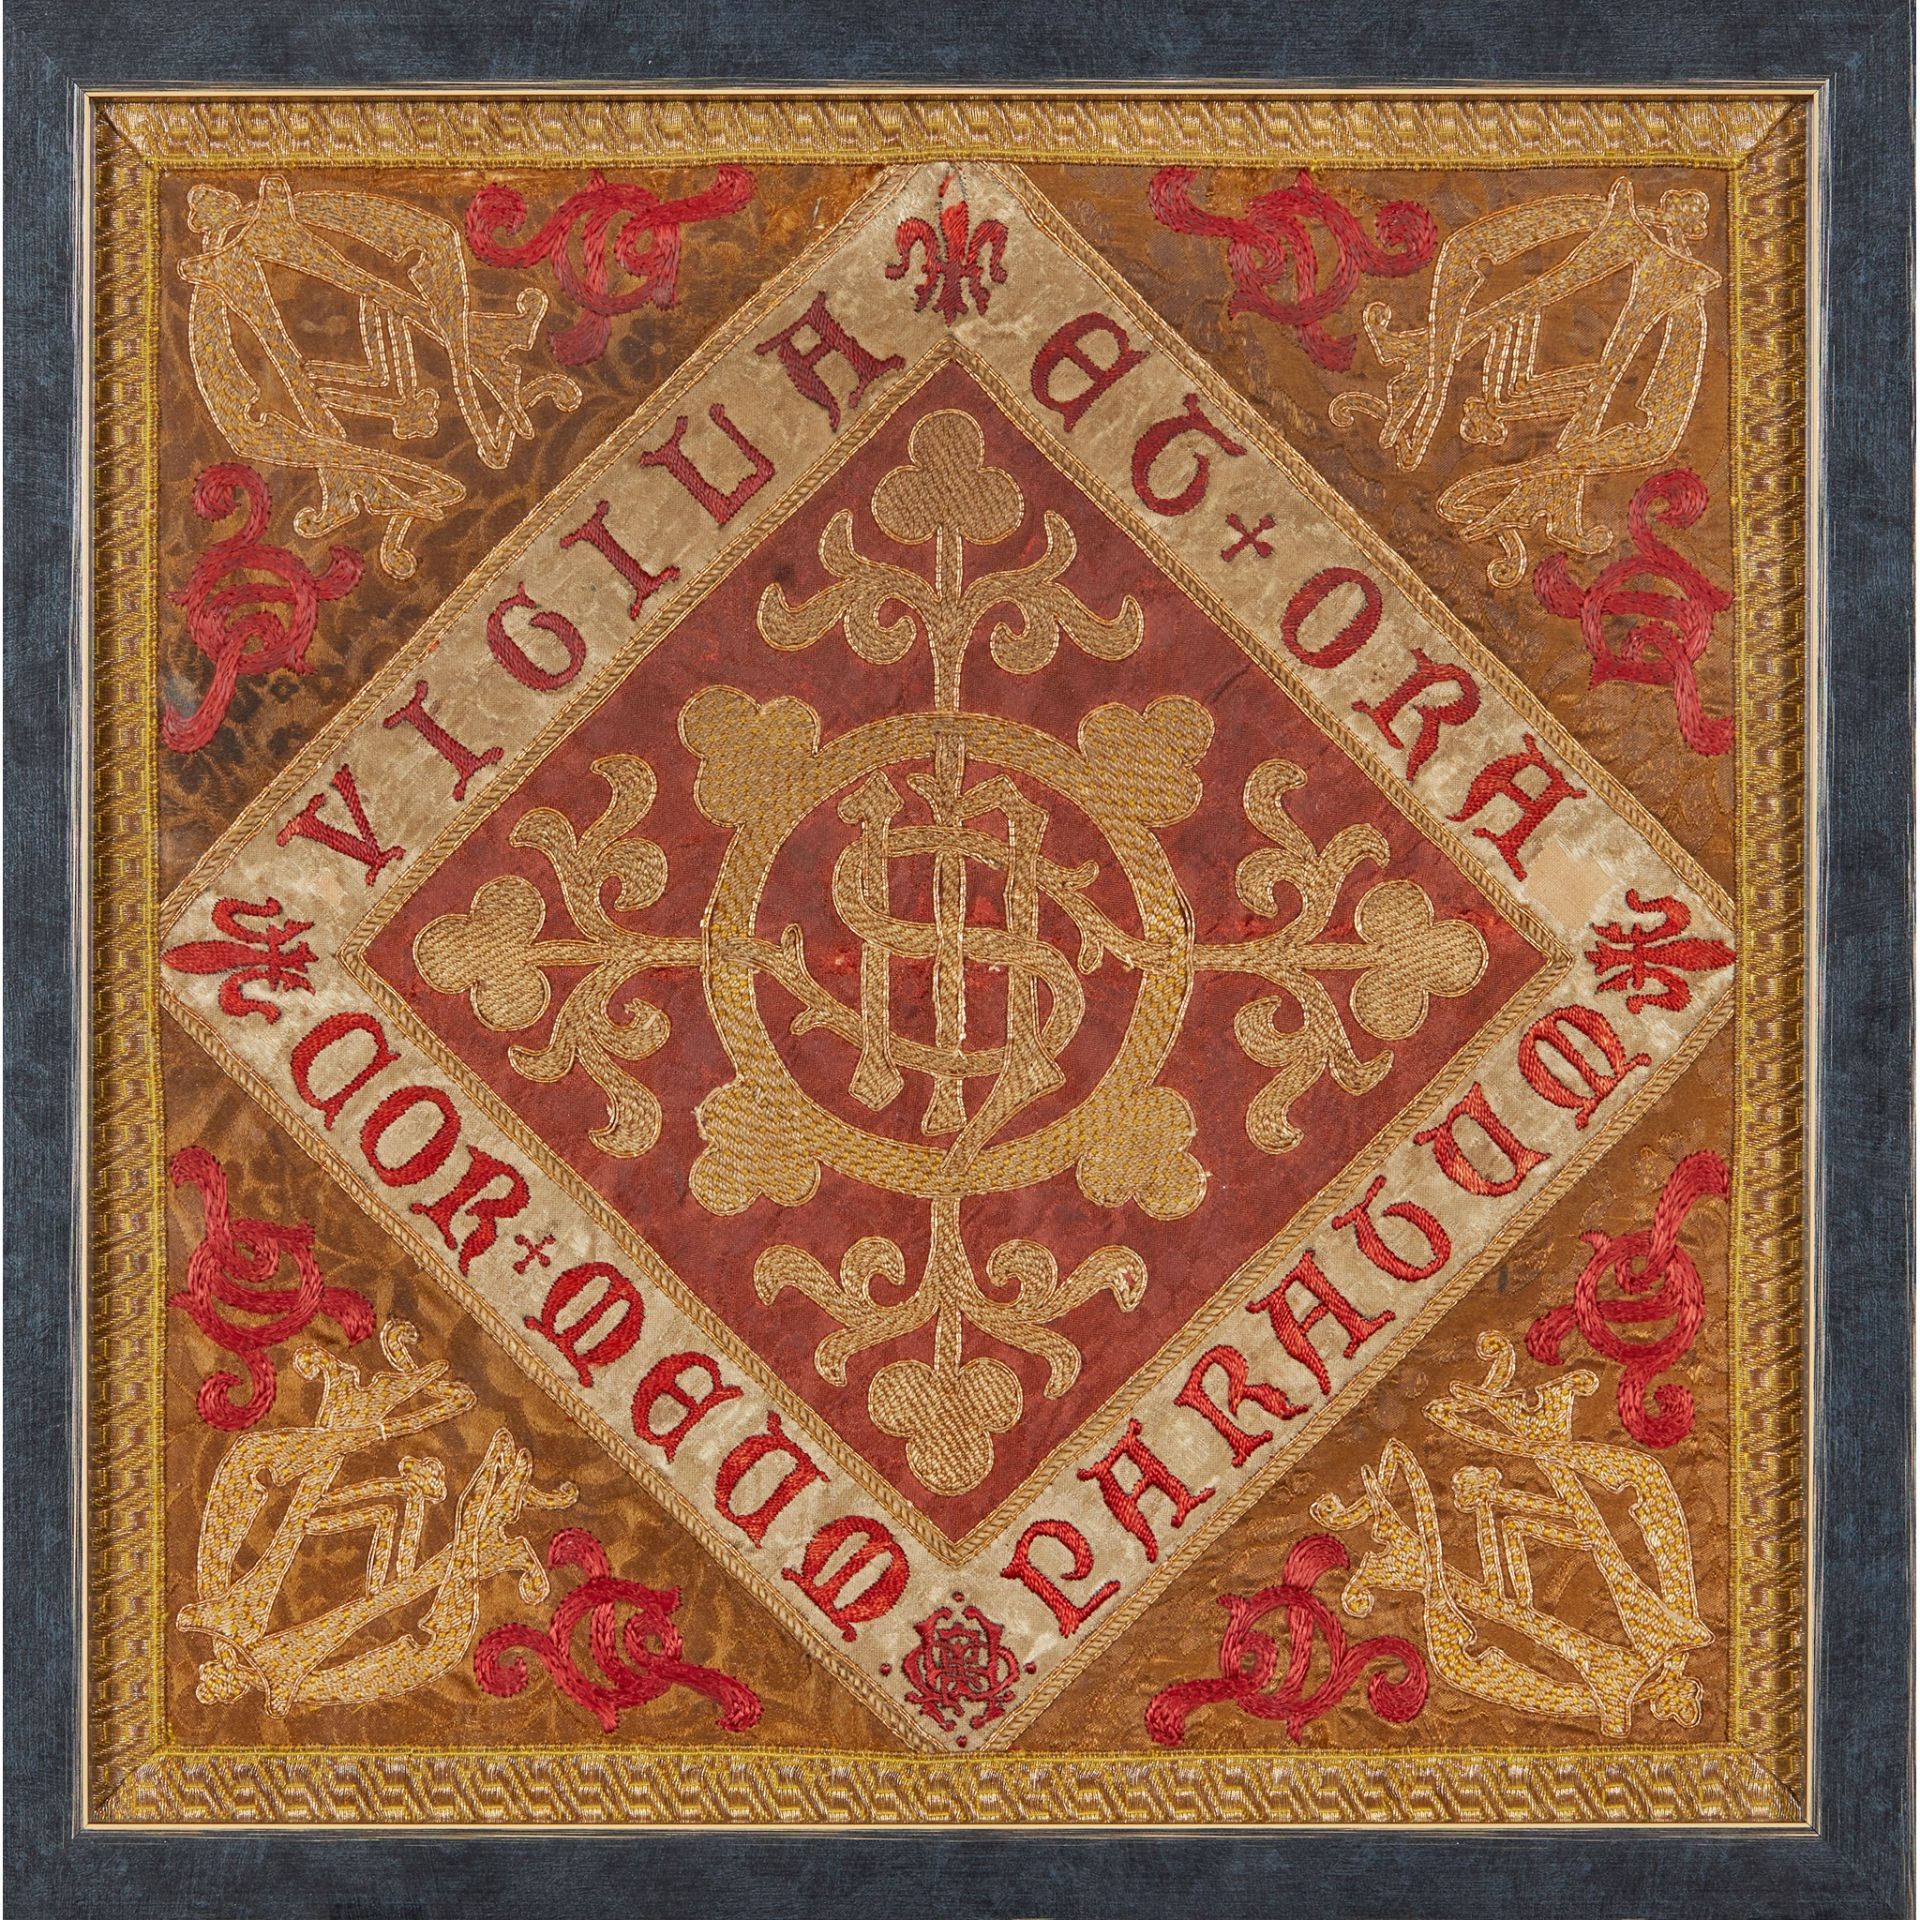 ENGLISH GOTHIC REVIVAL ECCLESIASTICAL EMBROIDERED PANEL, CIRCA 1870 - Image 2 of 3